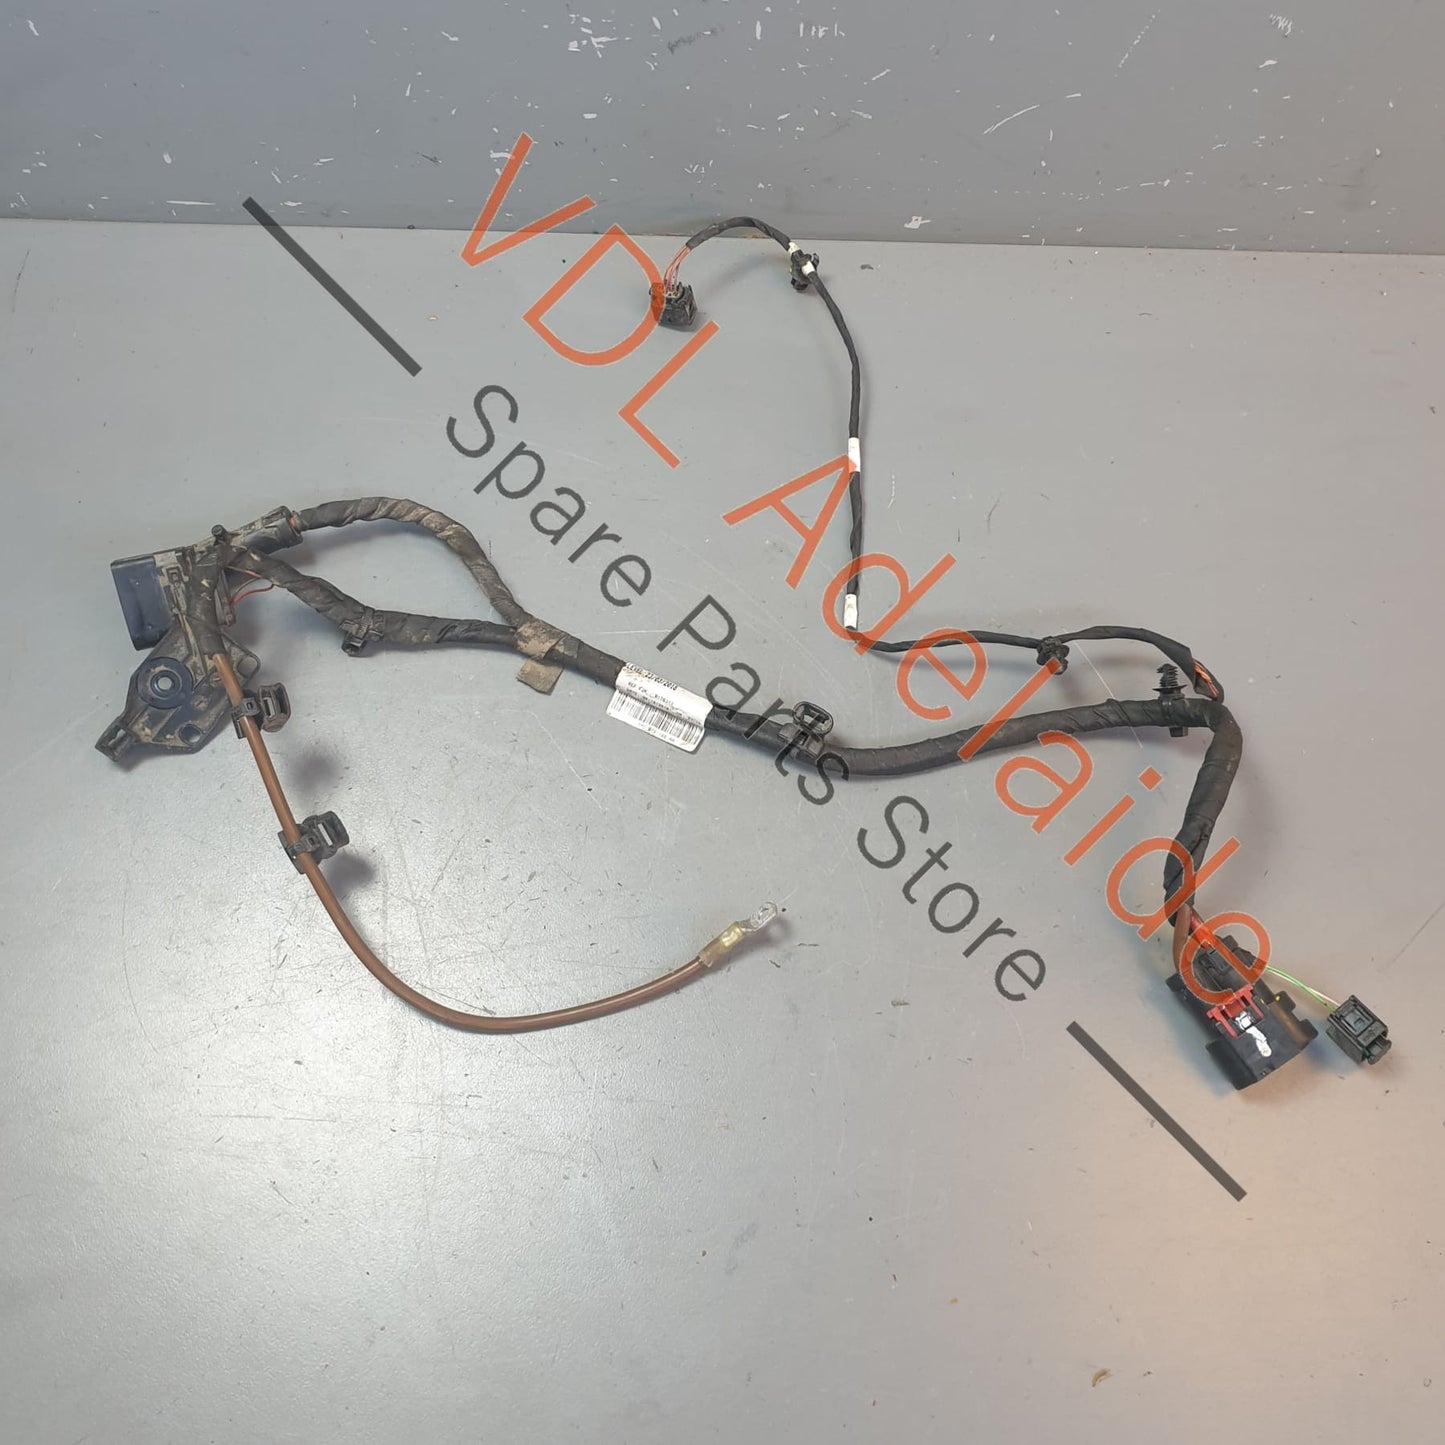 4M0971165AA    Porsche Cayenne E3 Rear Suspension Adapter Wiring Cable Harness 4M0971165AA